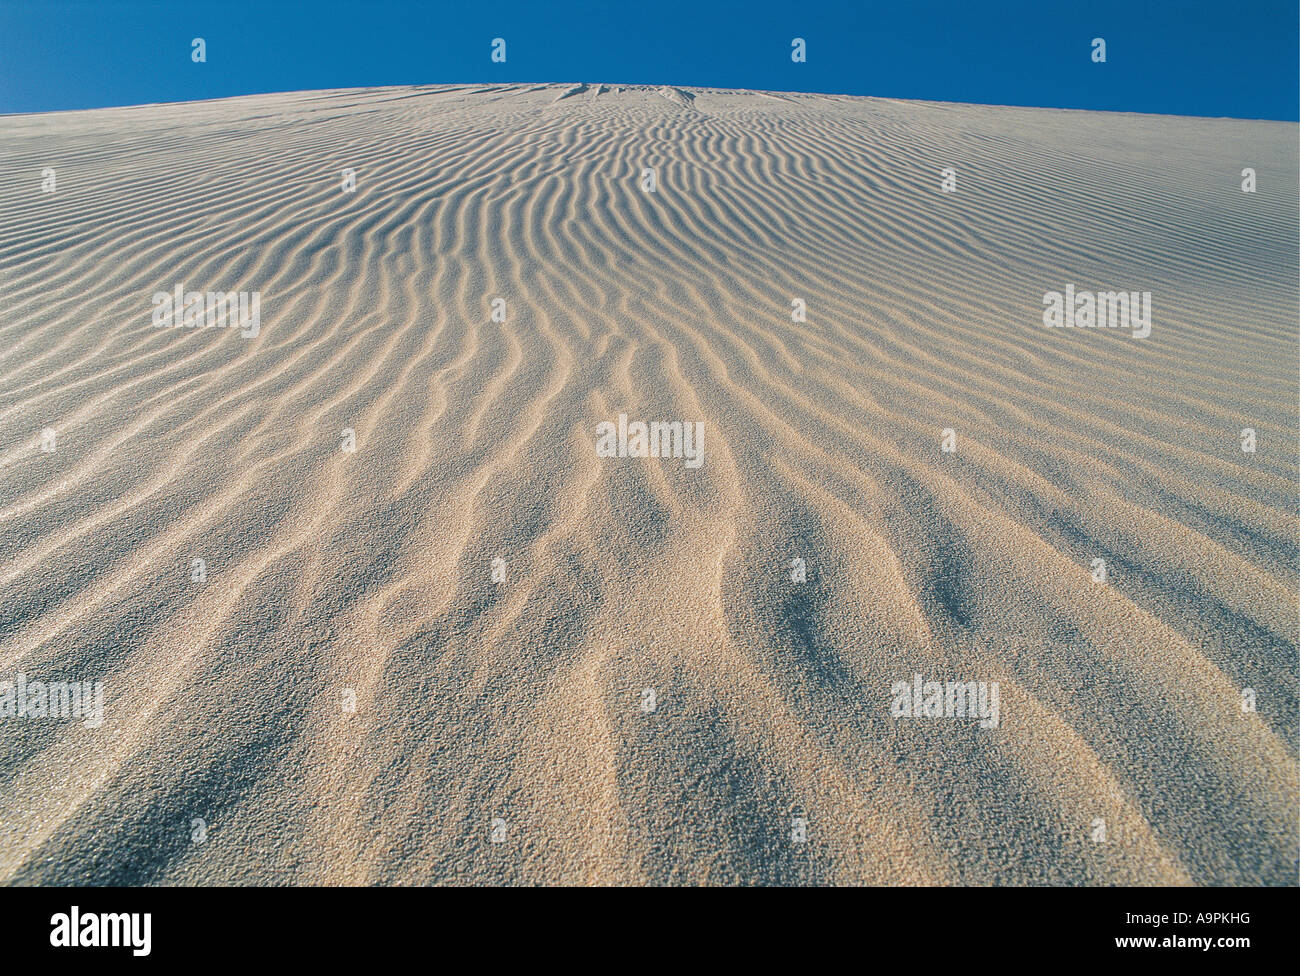 Ripples and wind patterns of sand dune De Hoop Nature Reserve Western Cape South Africa Stock Photo